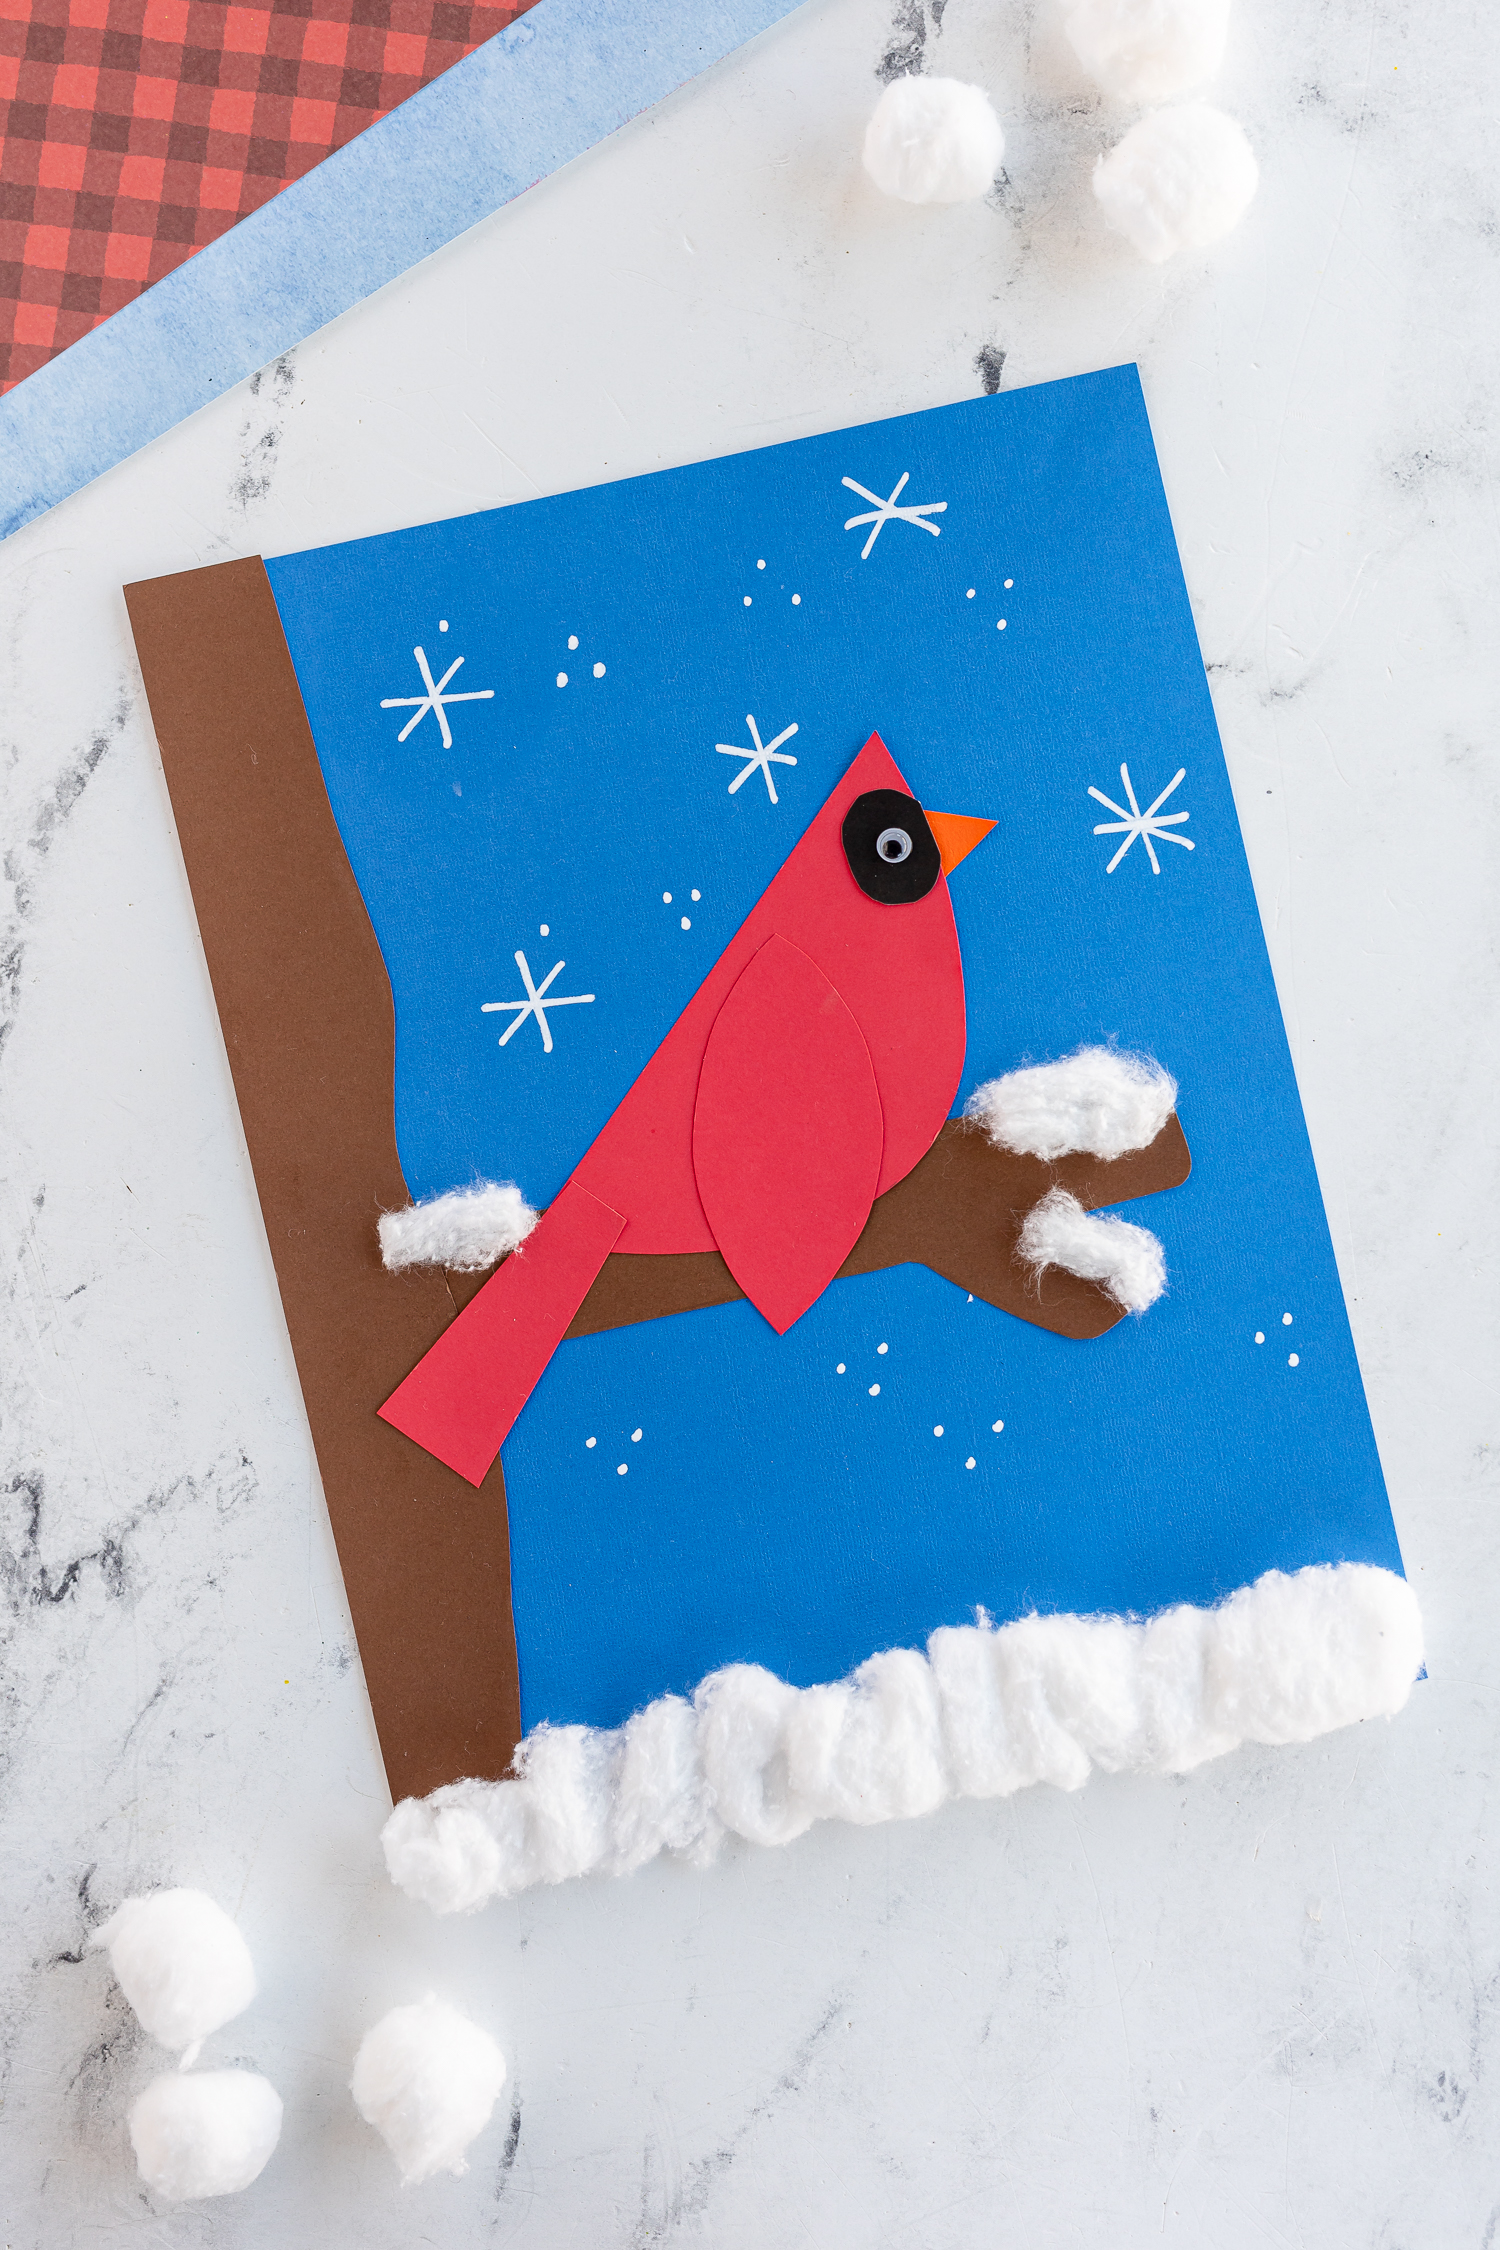 winter cardinal bird made out of paper on blue background